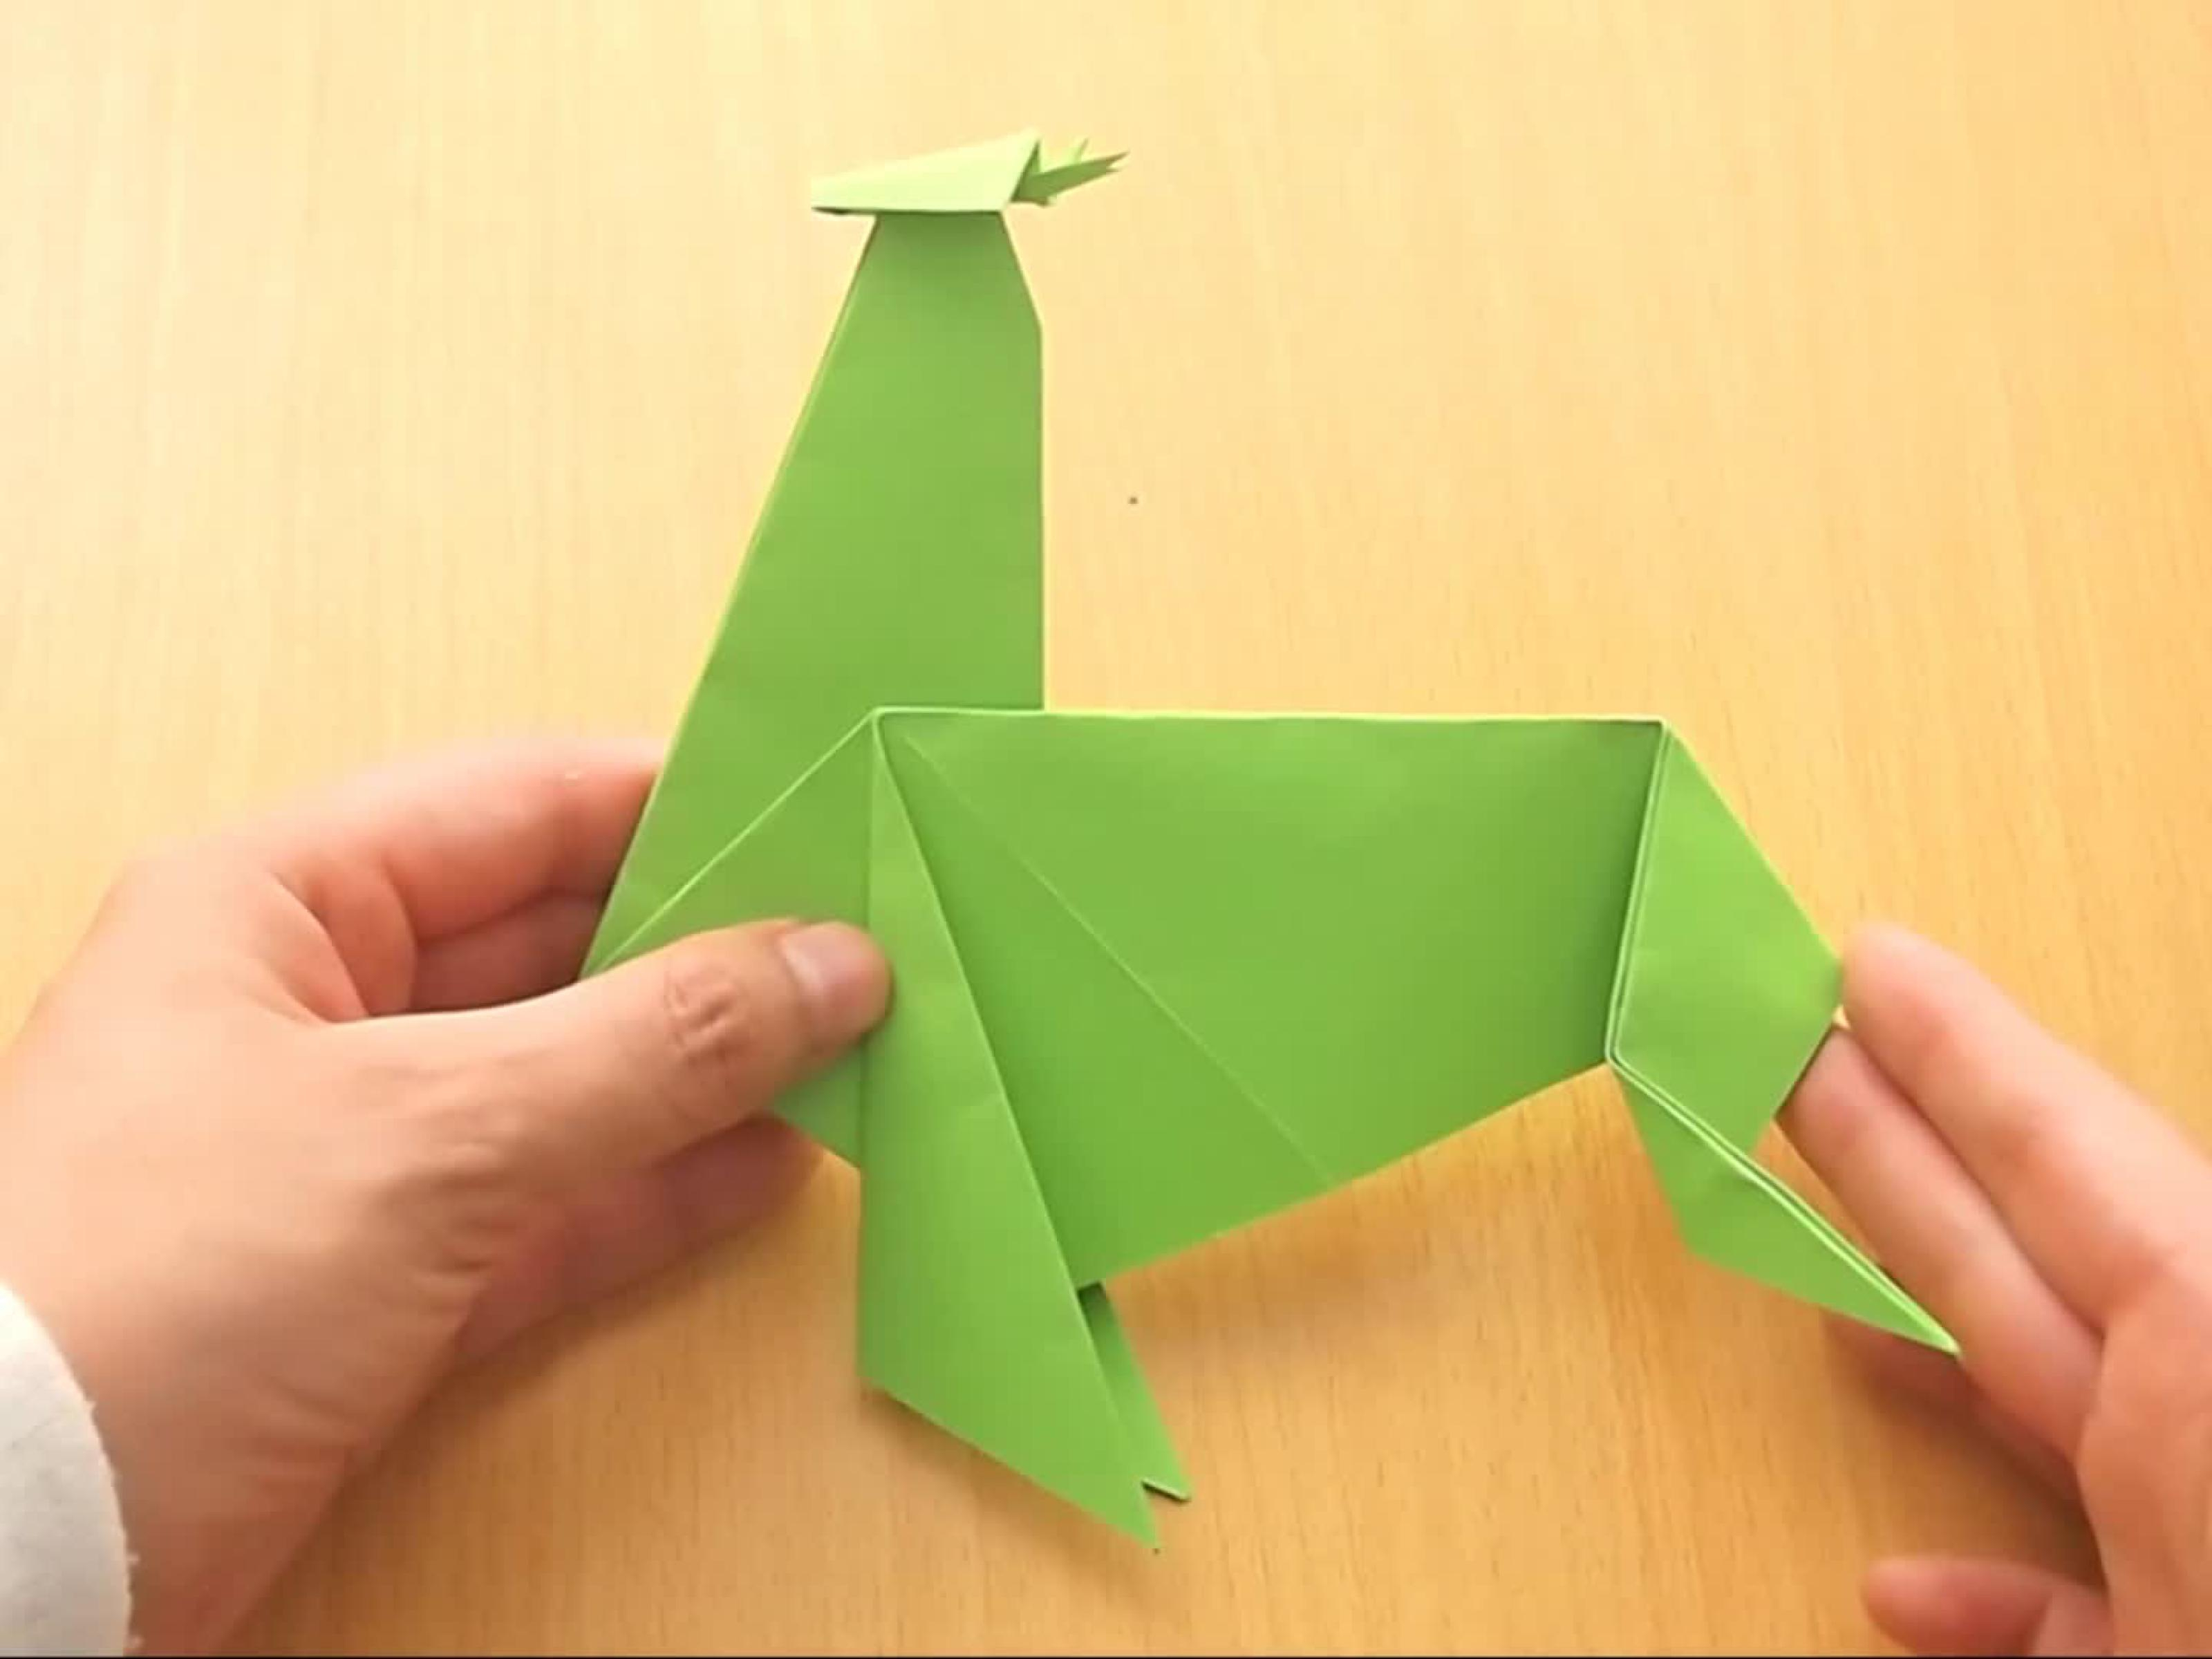 How To Make An Origami How To Make An Origami Reindeer With Pictures Wikihow